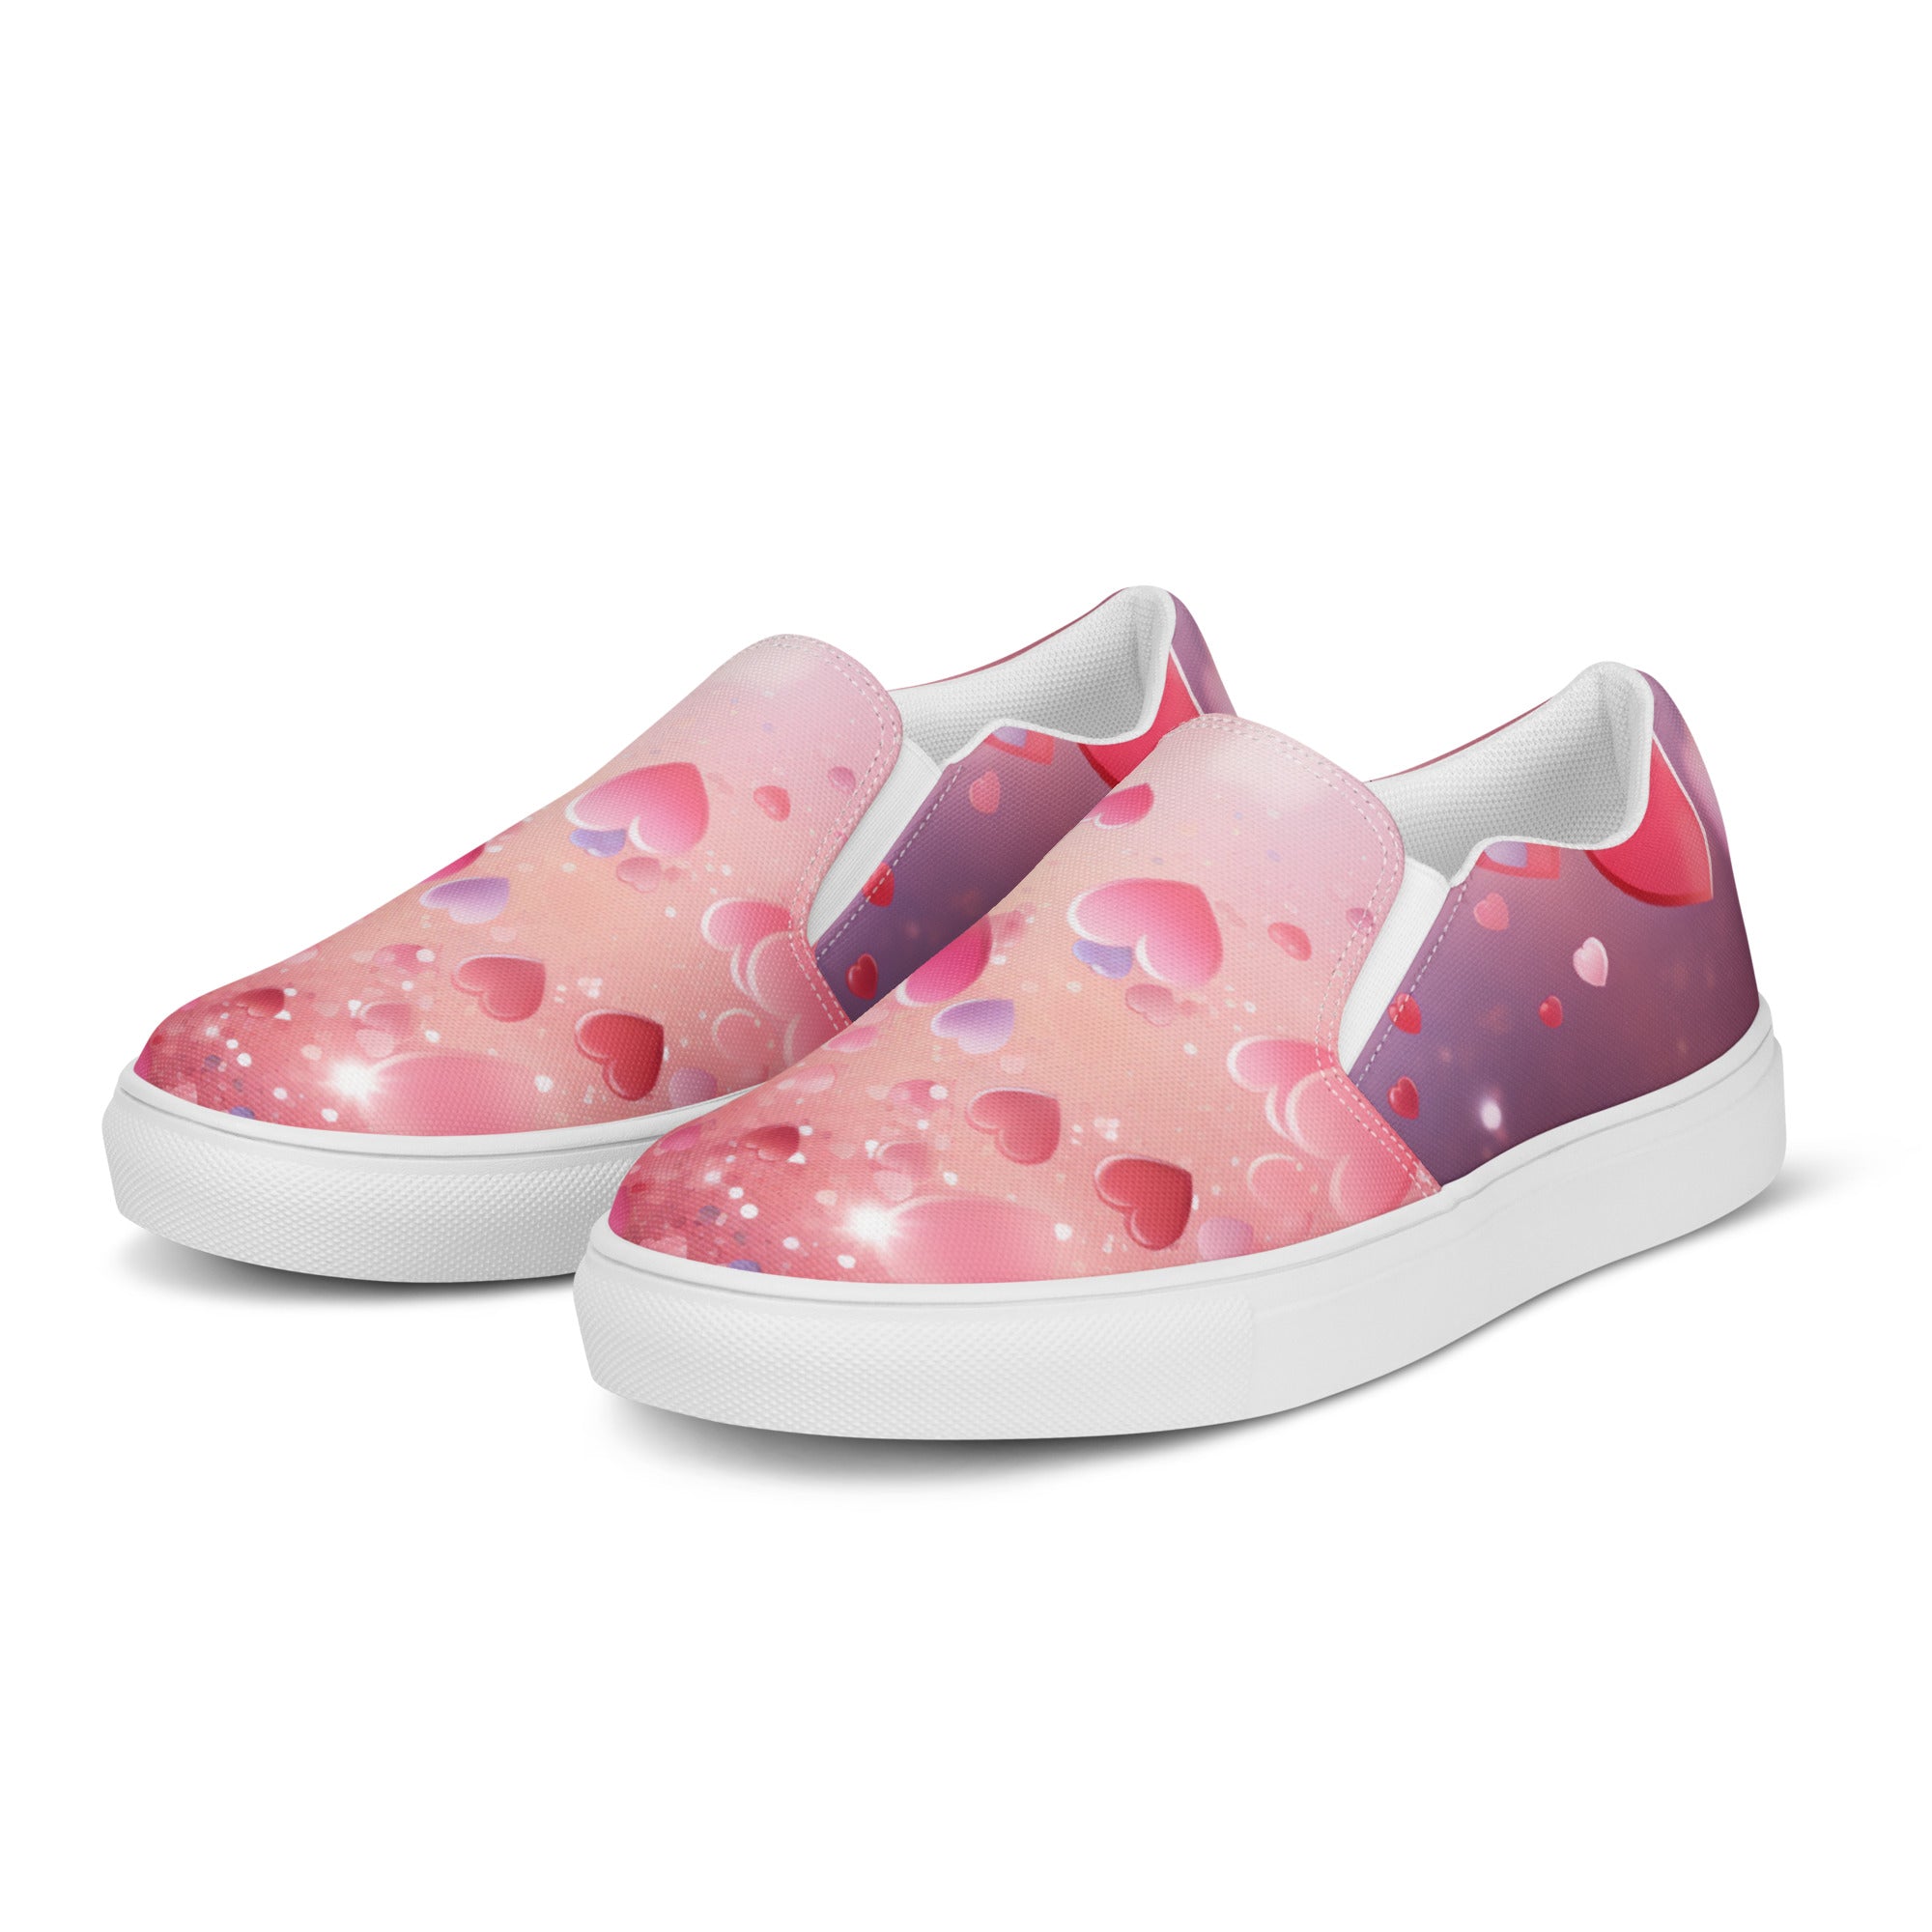 Enchanted Heart Slip-Ons: Fairy-Tale Canvas Shoes for Her - The Perfect Gift for Love & Celebration | Fairy Shoes